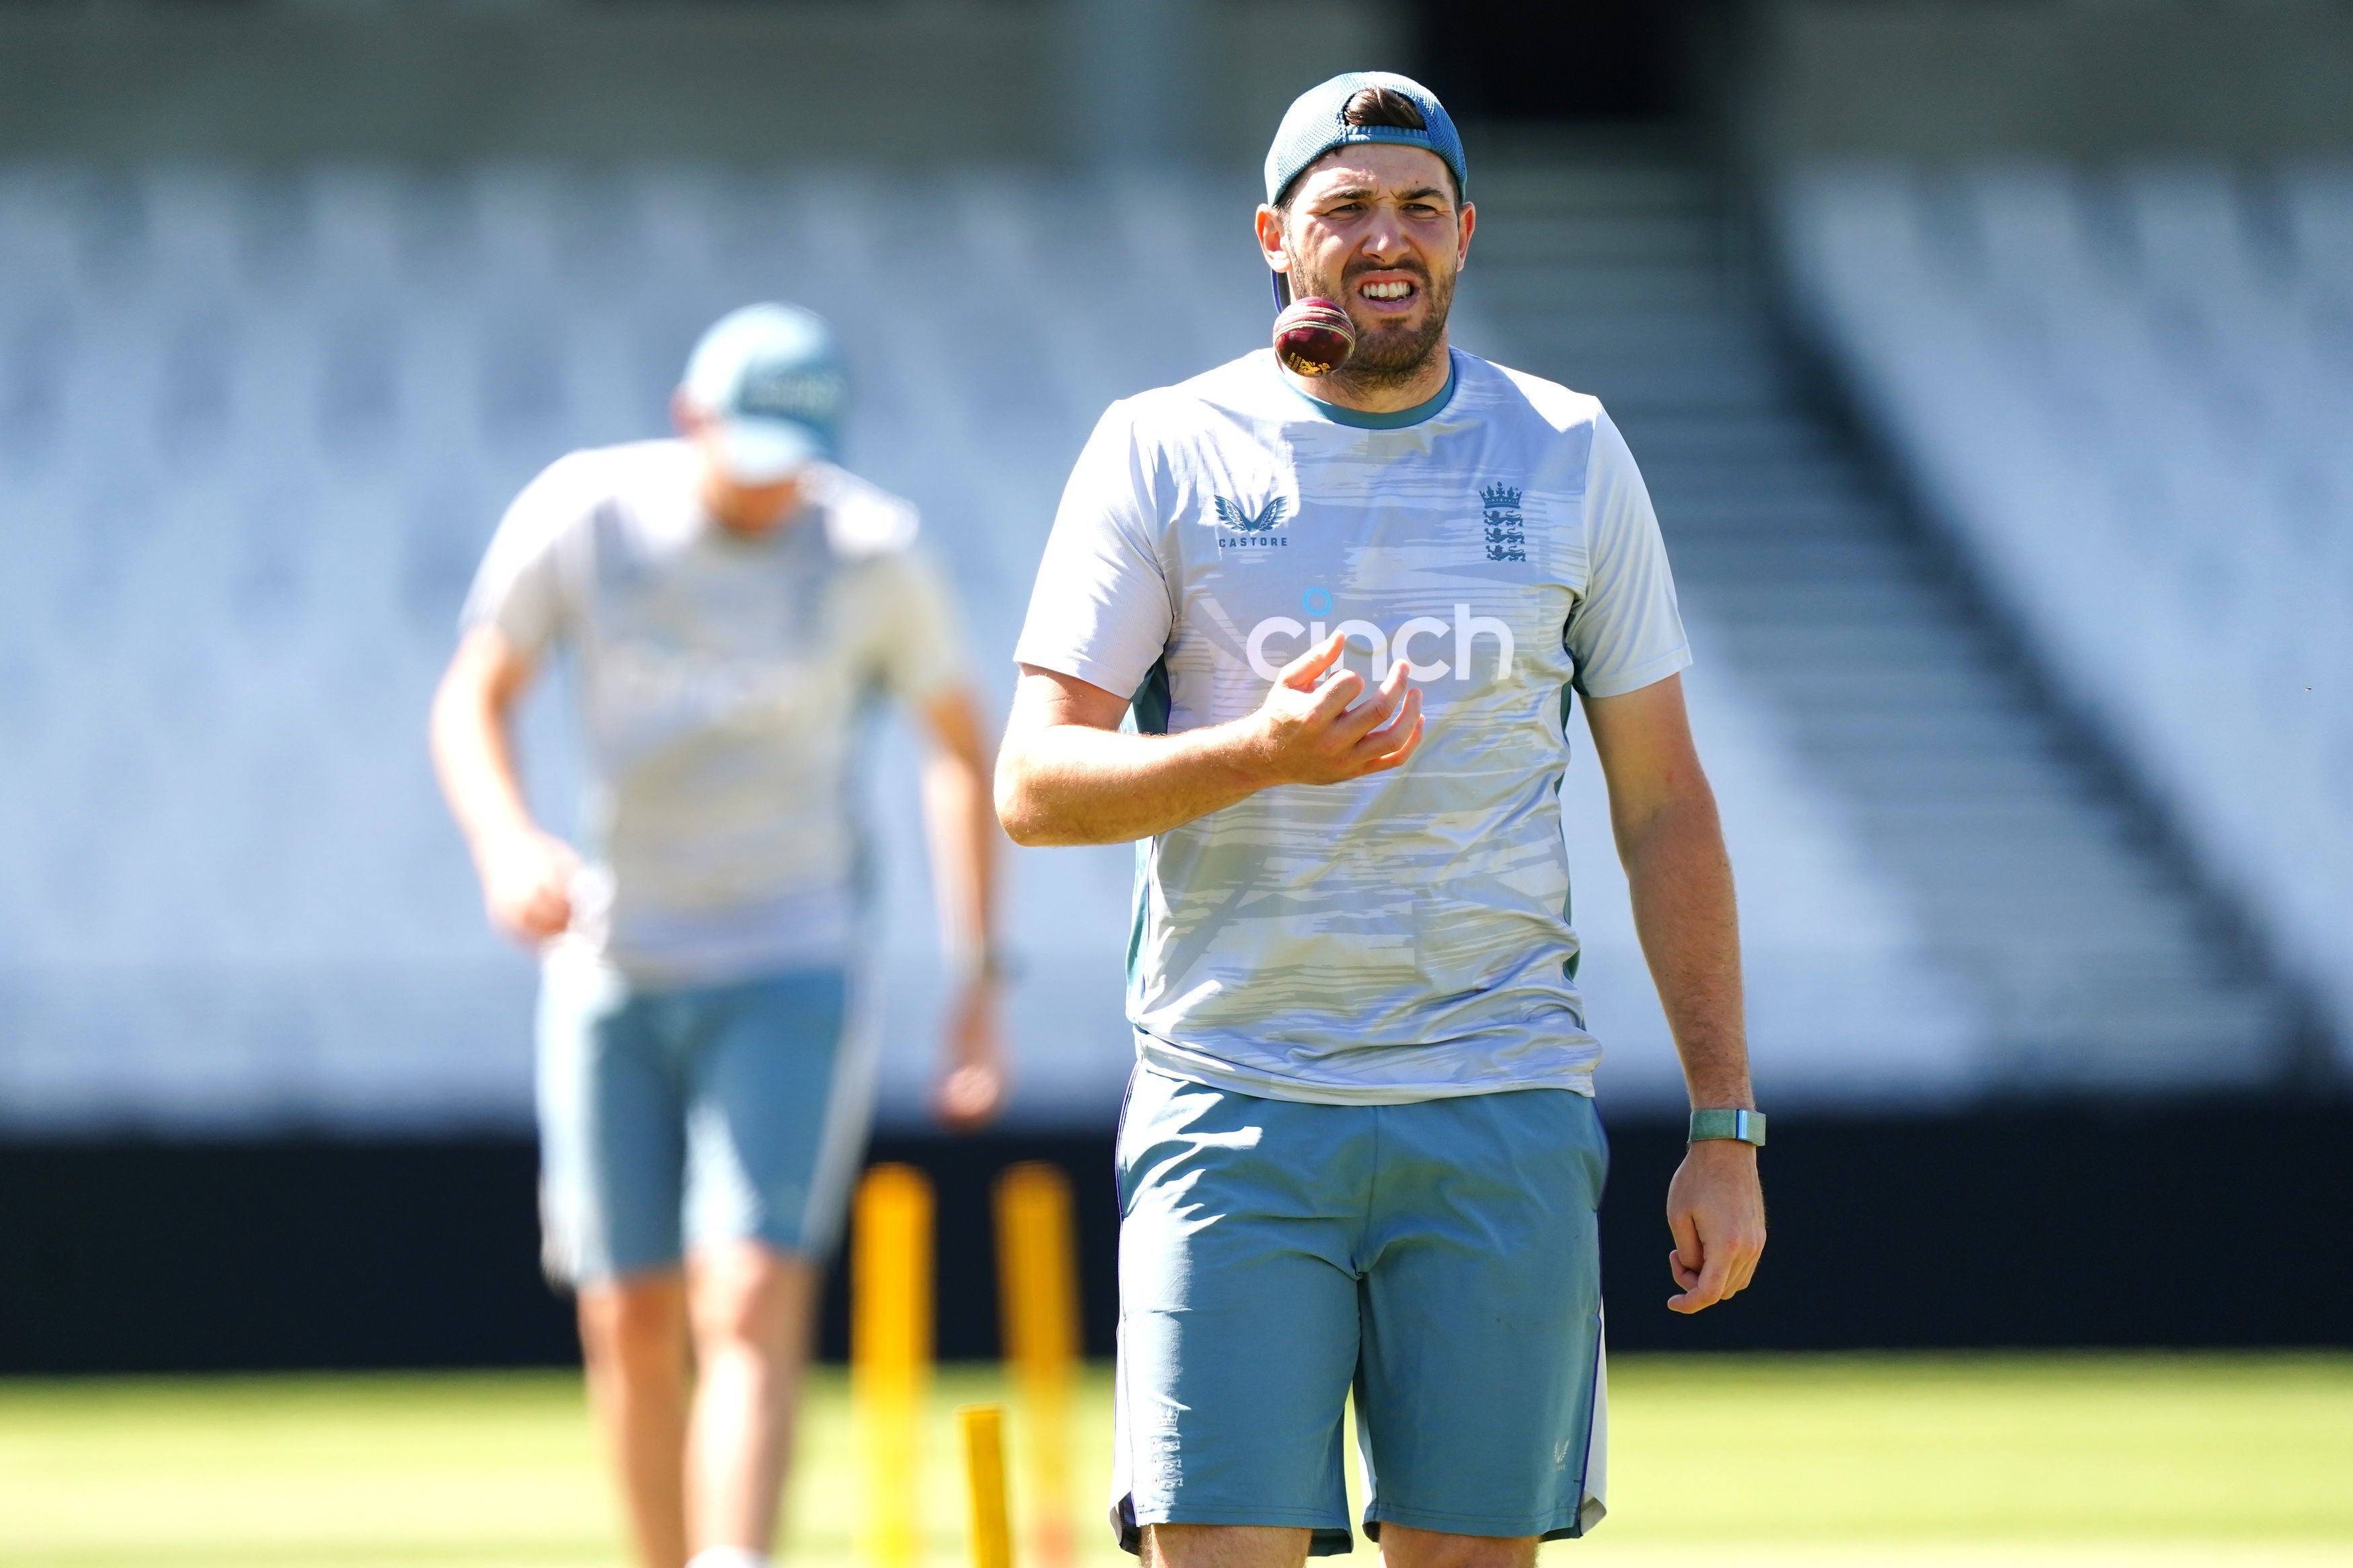 Overton will make his Test debut at Headingley